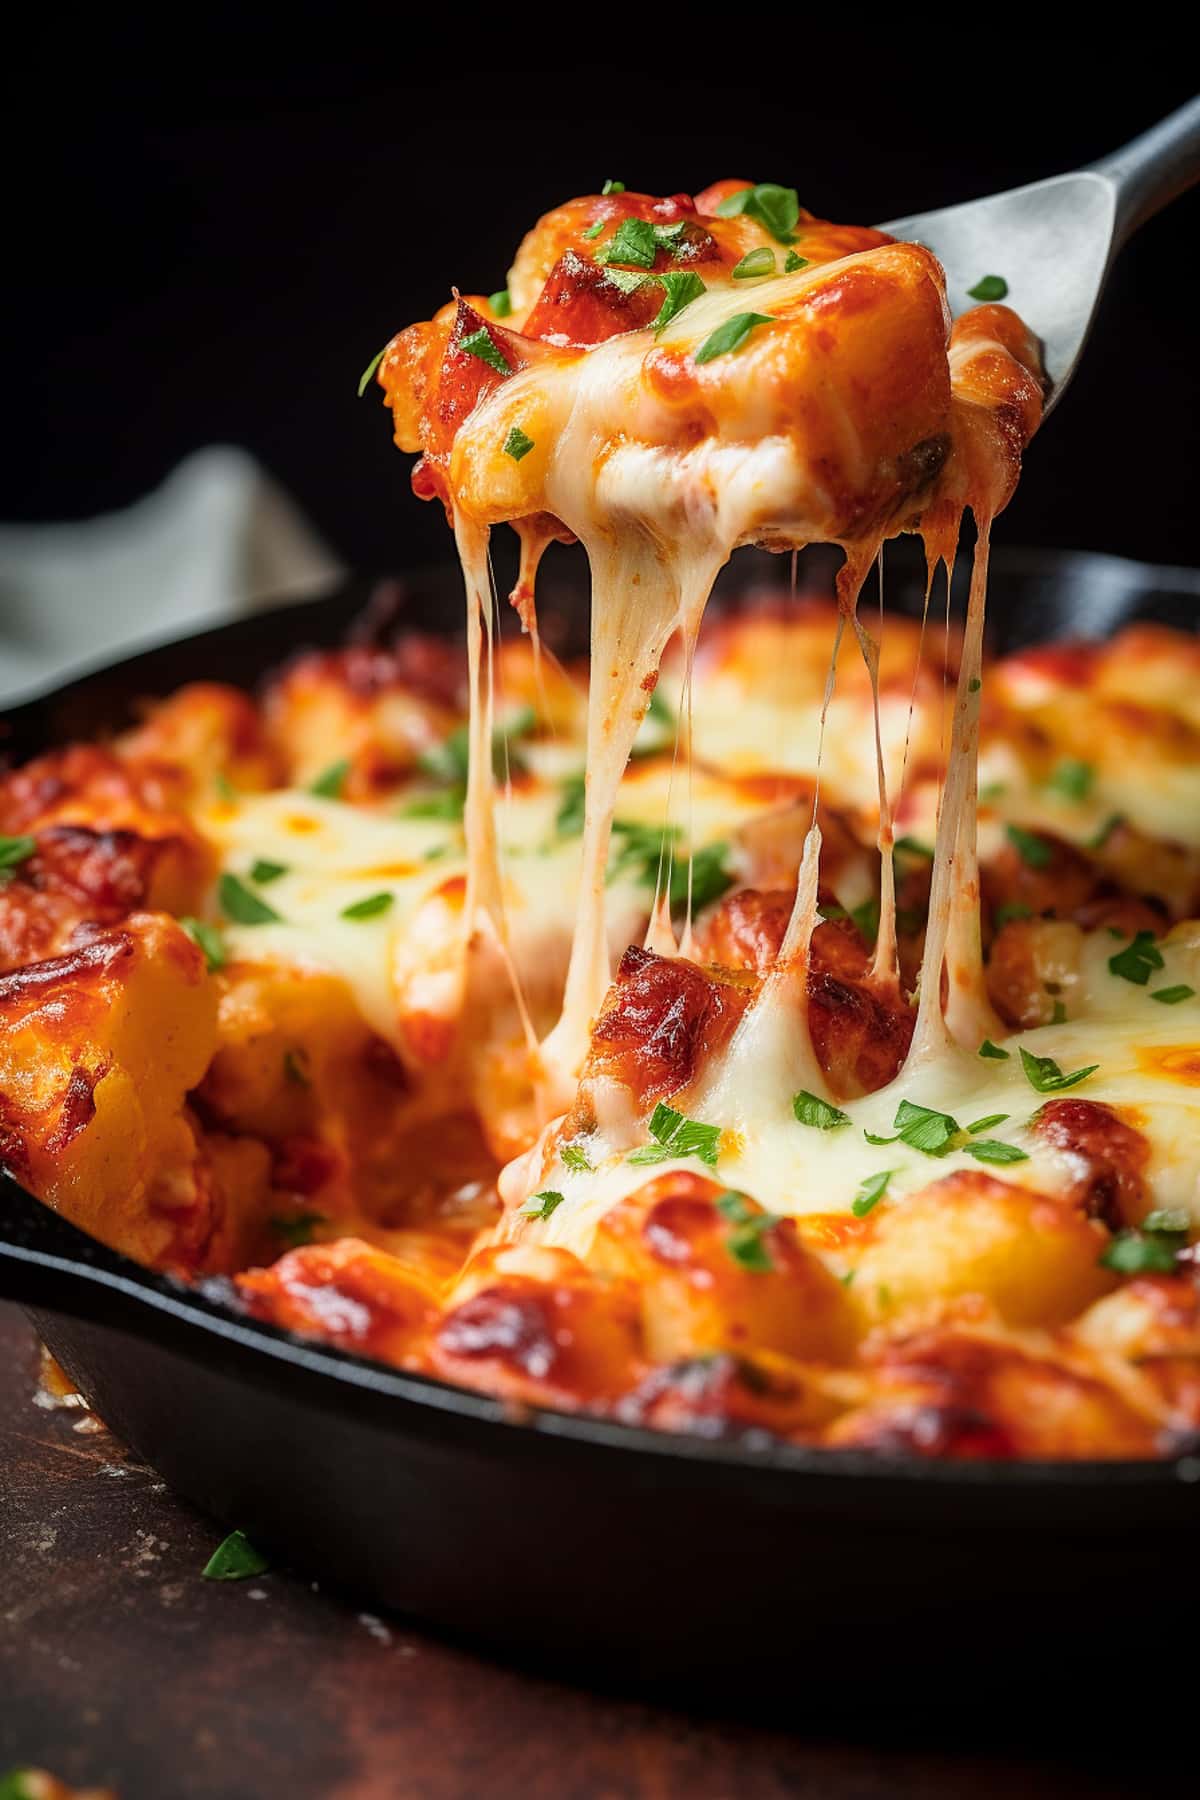 Baked gnocchi with lots of melted cheese.